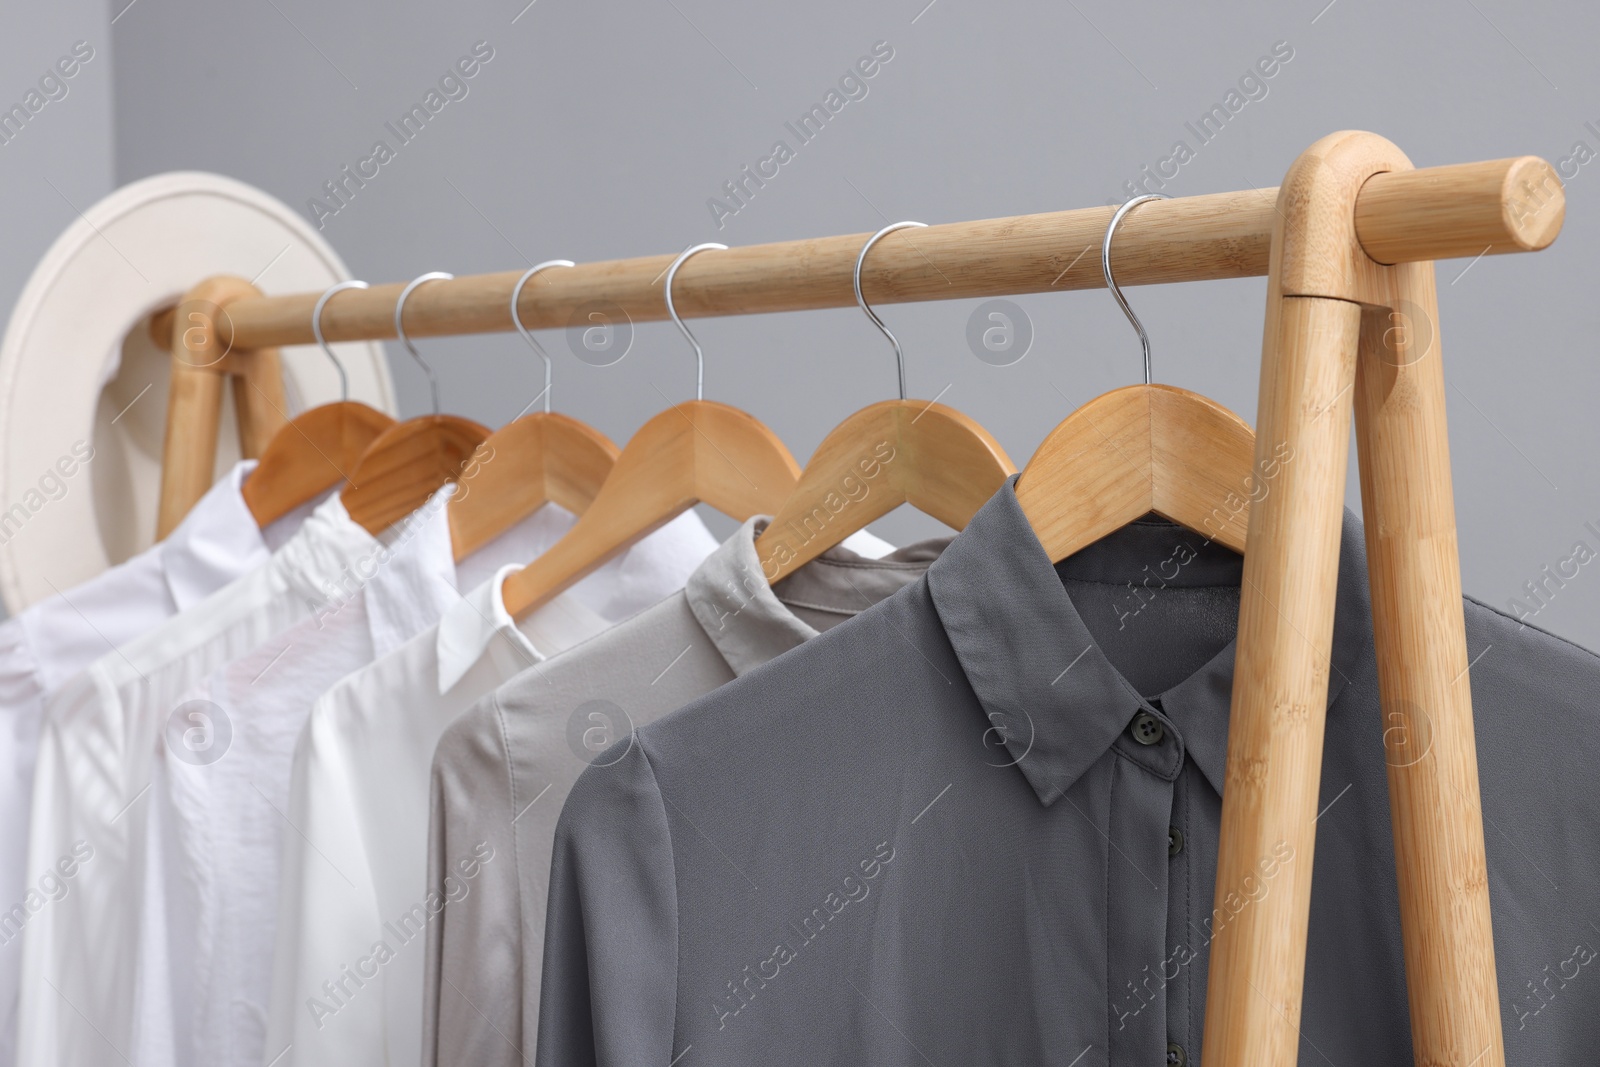 Photo of Rack with different stylish shirts on wooden hangers against grey wall, closeup. Organizing clothes